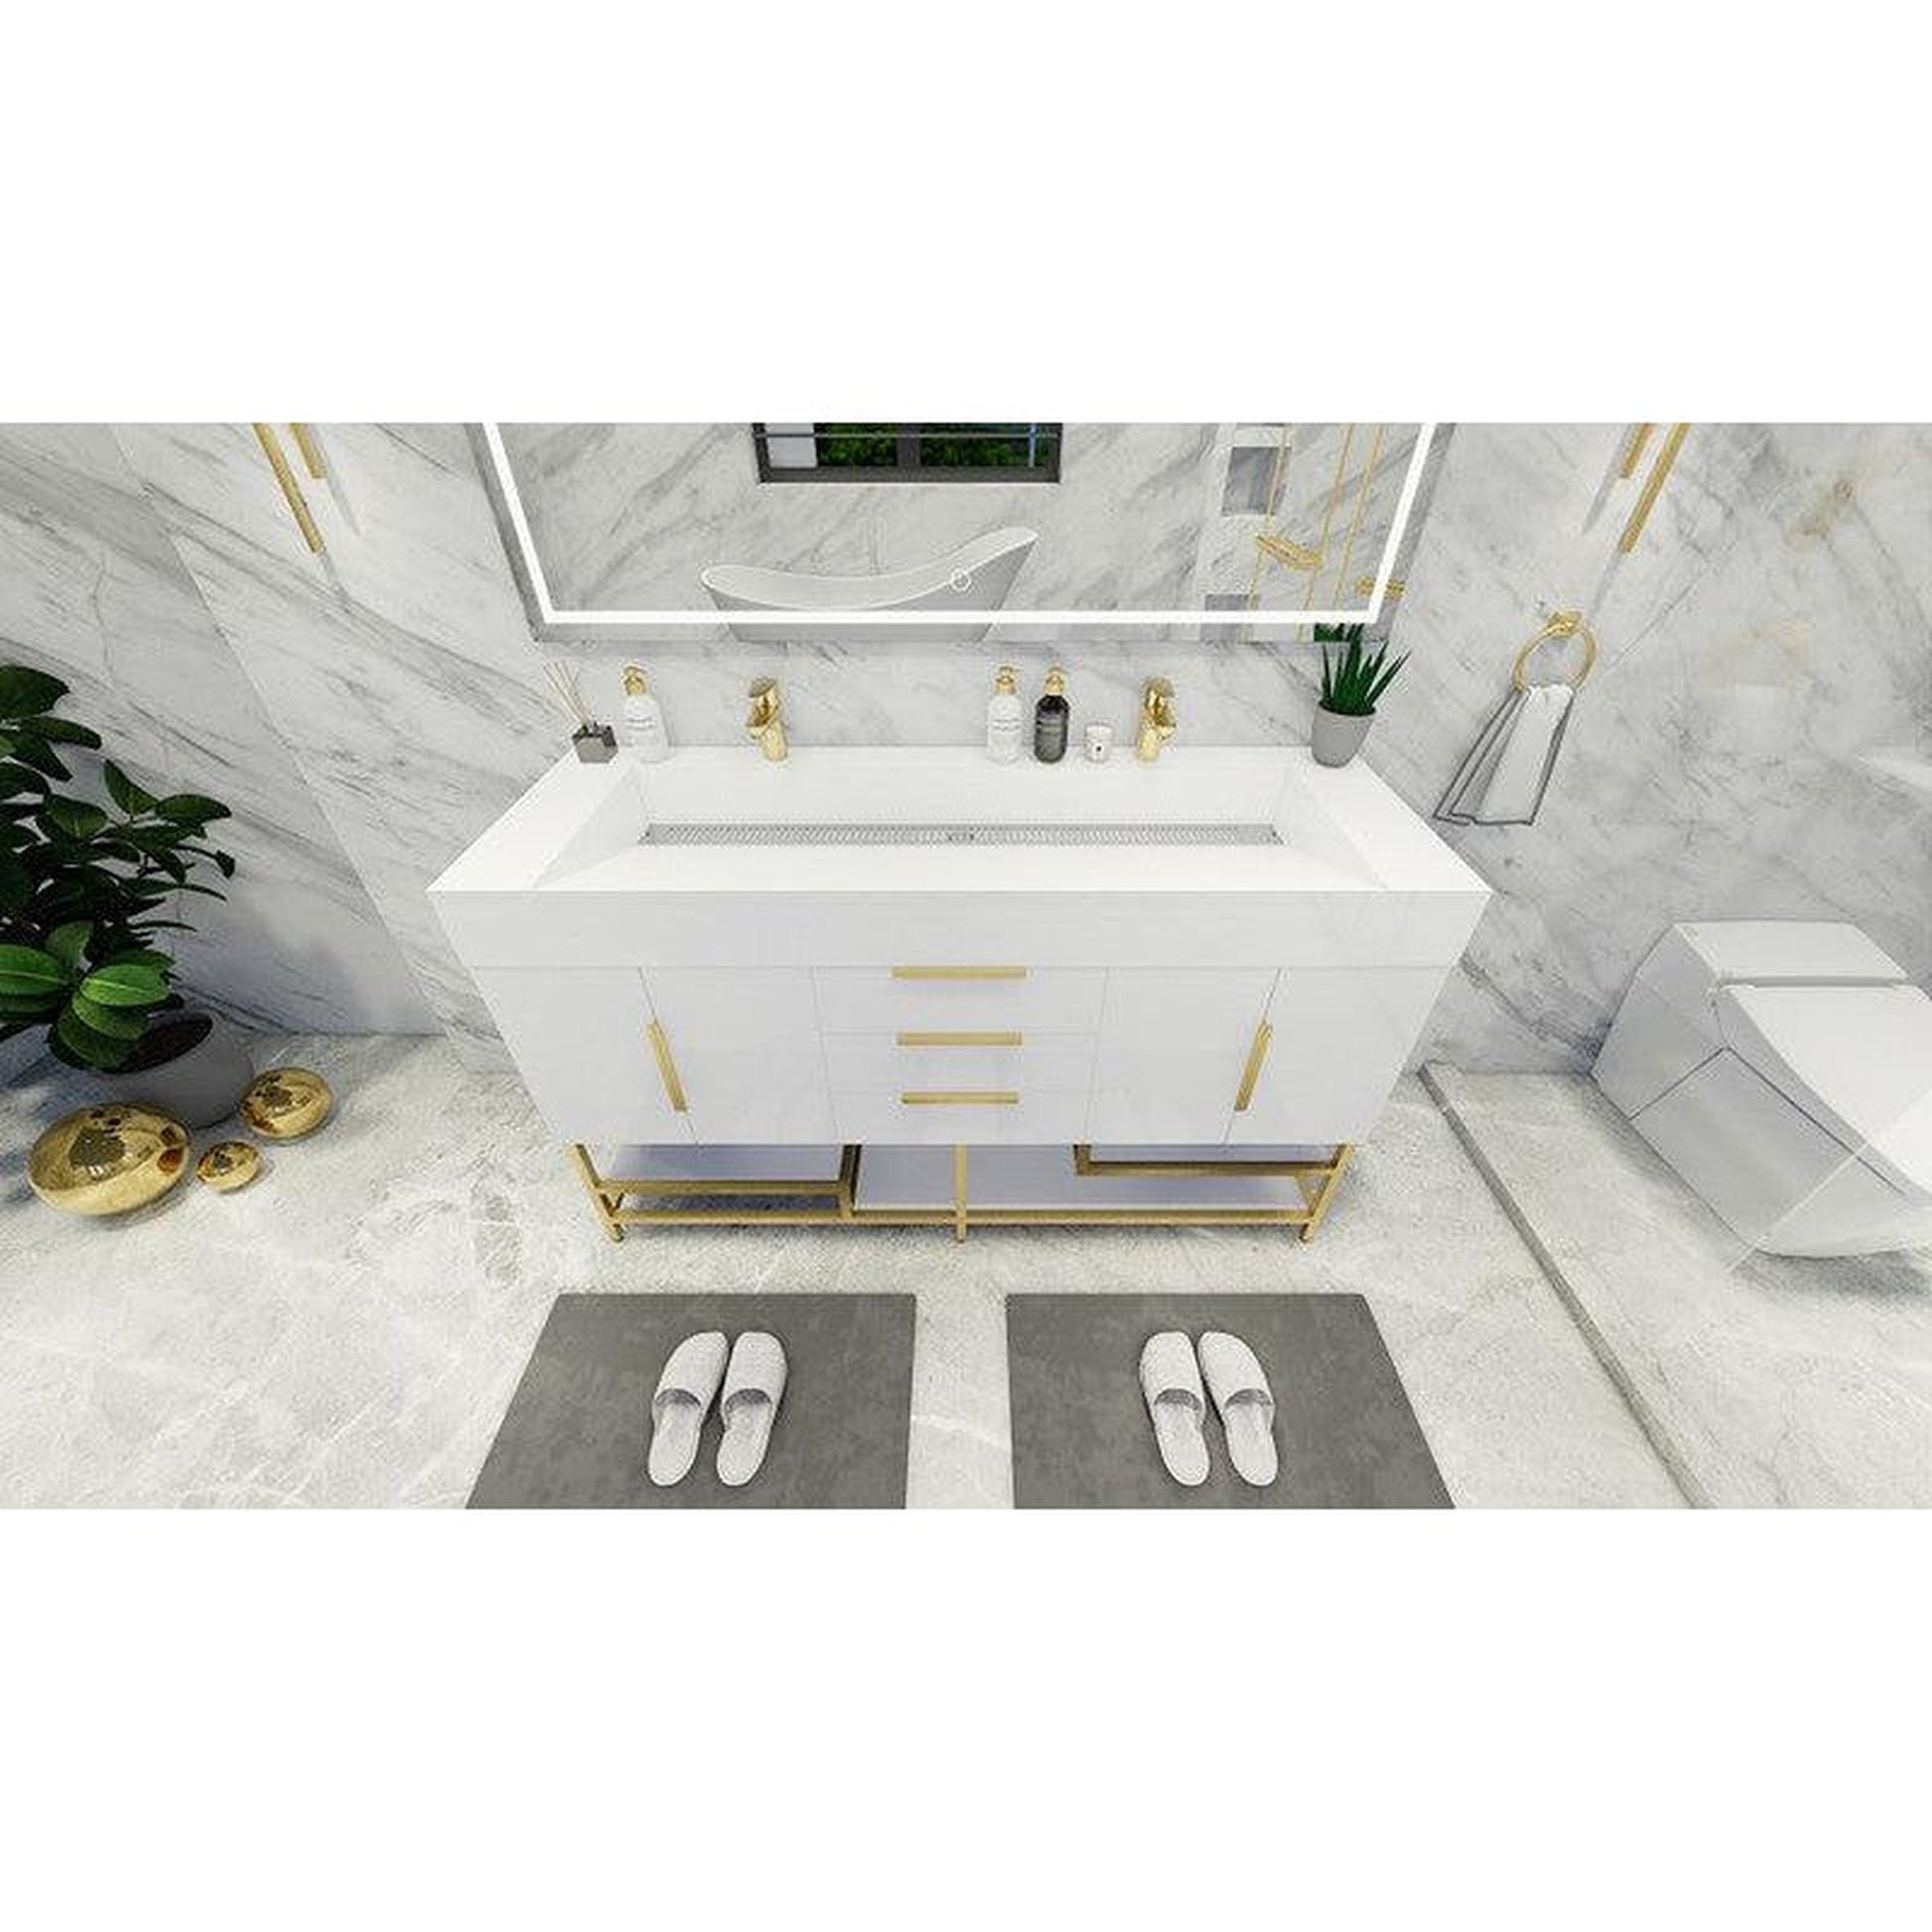 Moreno Bath Bethany 60" High Gloss White Freestanding Vanity With Double Reinforced White Acrylic Sinks